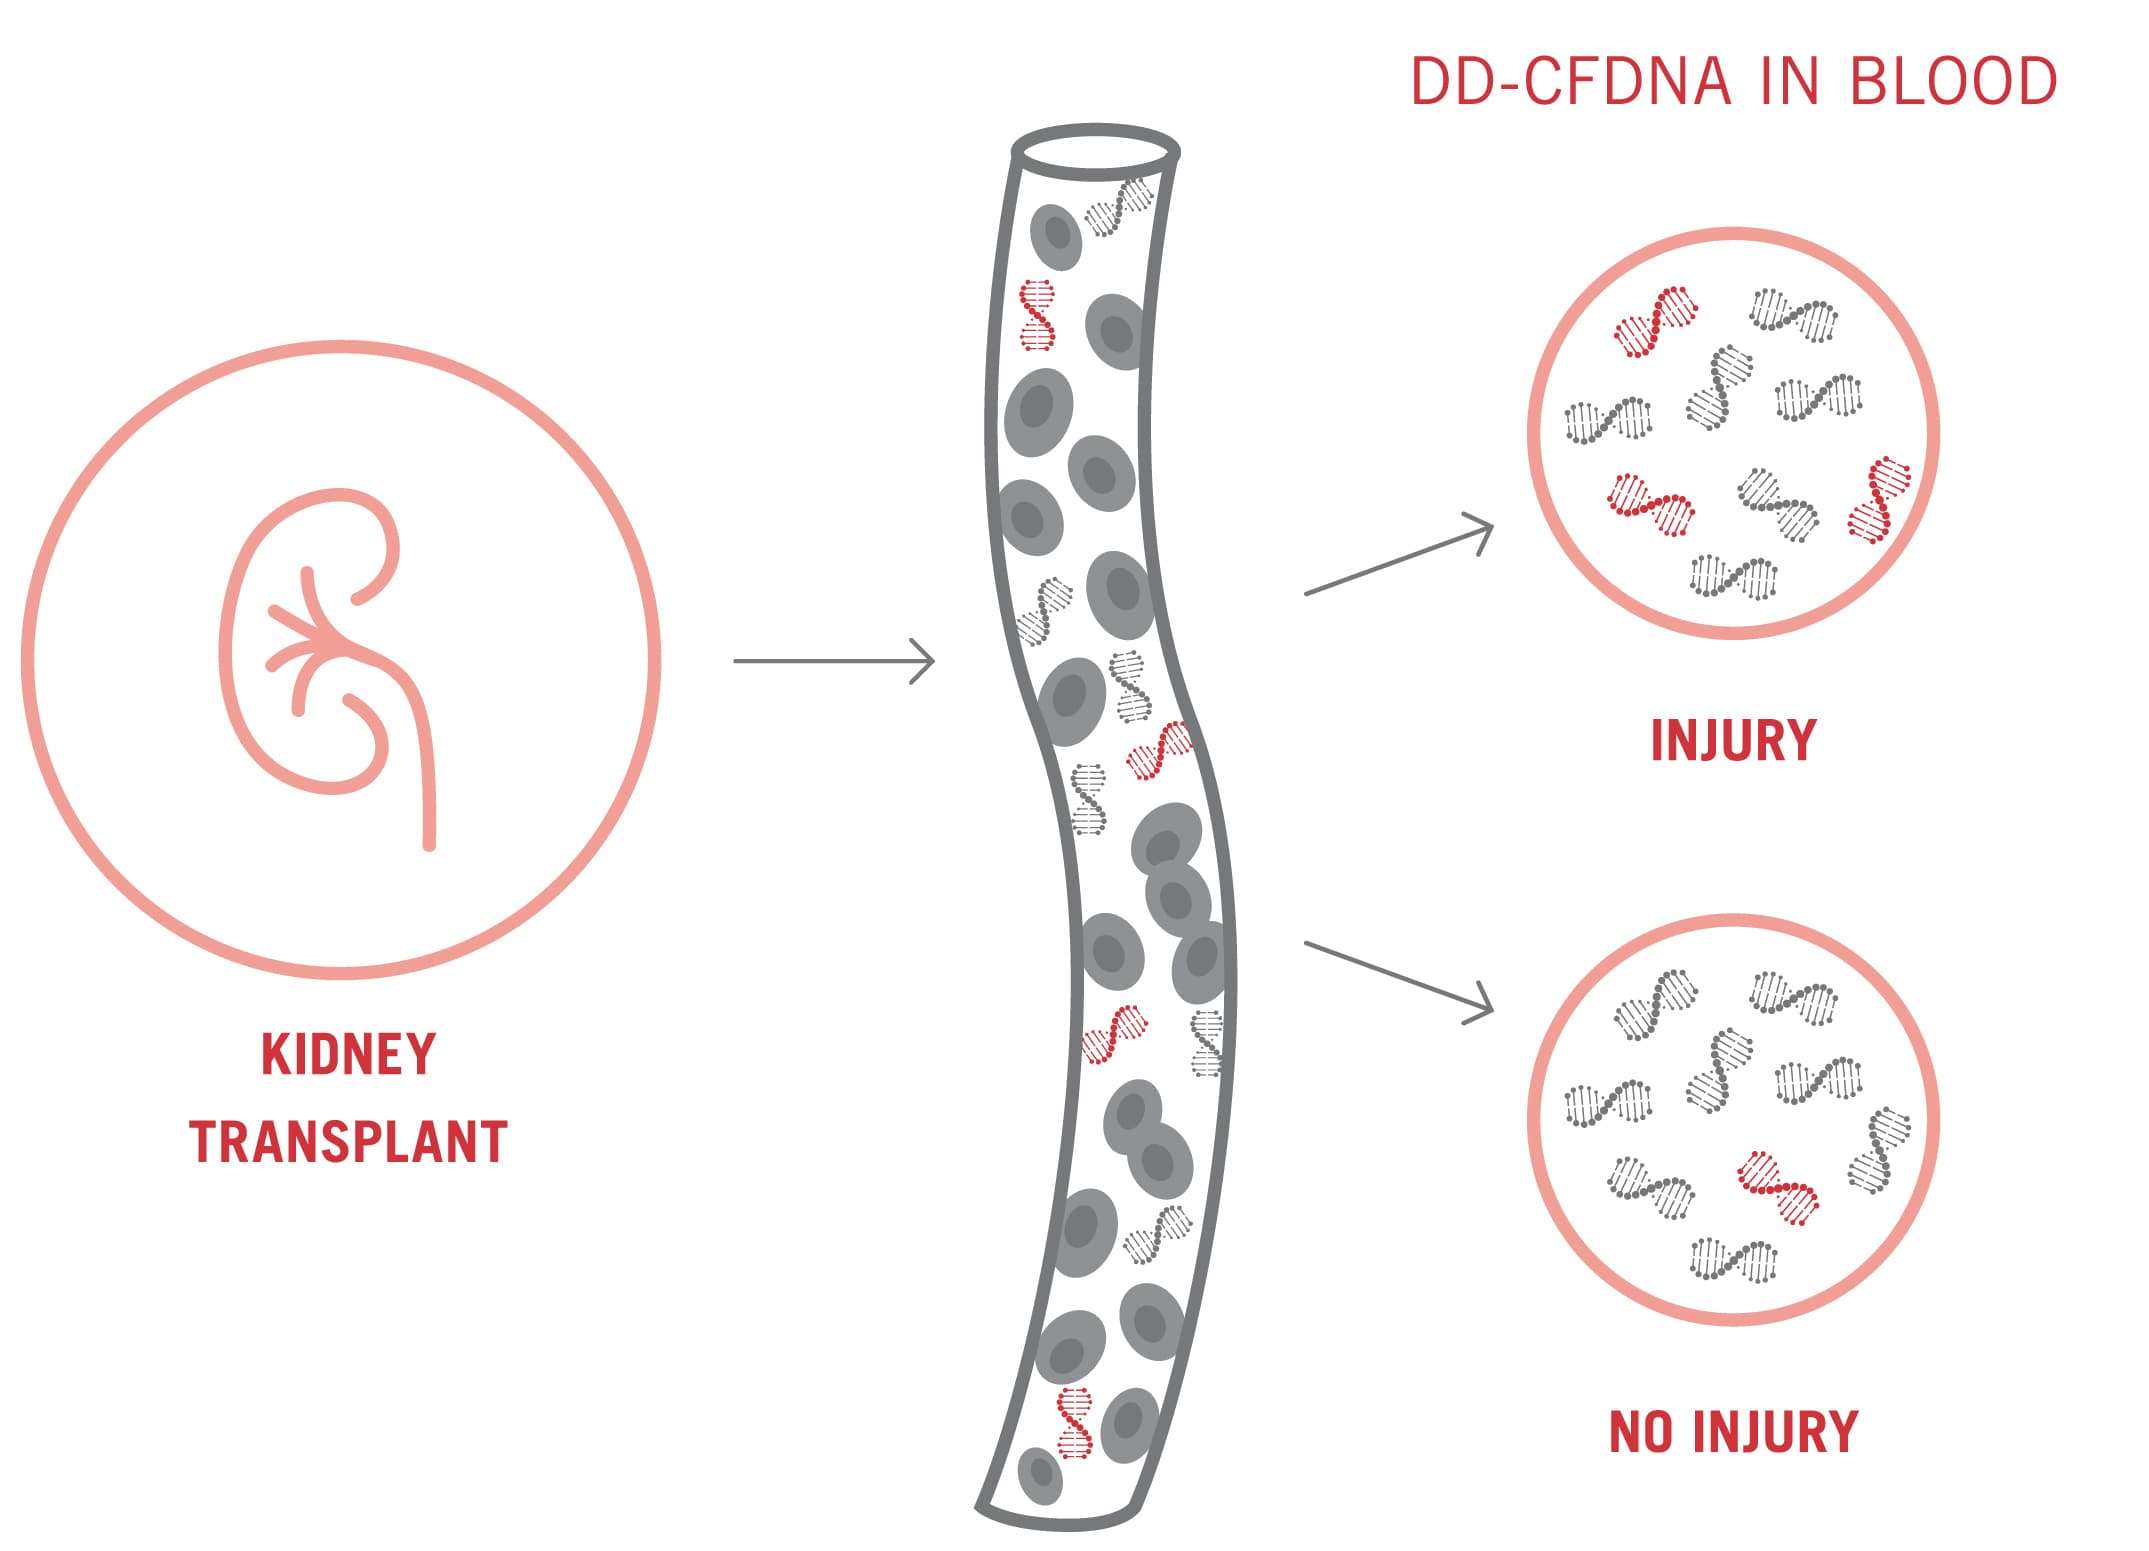 Following a kidney transplant, a higher percentage of dd-cfDNA in blood in indicates injury, whereas a low percentage indicates no injury.